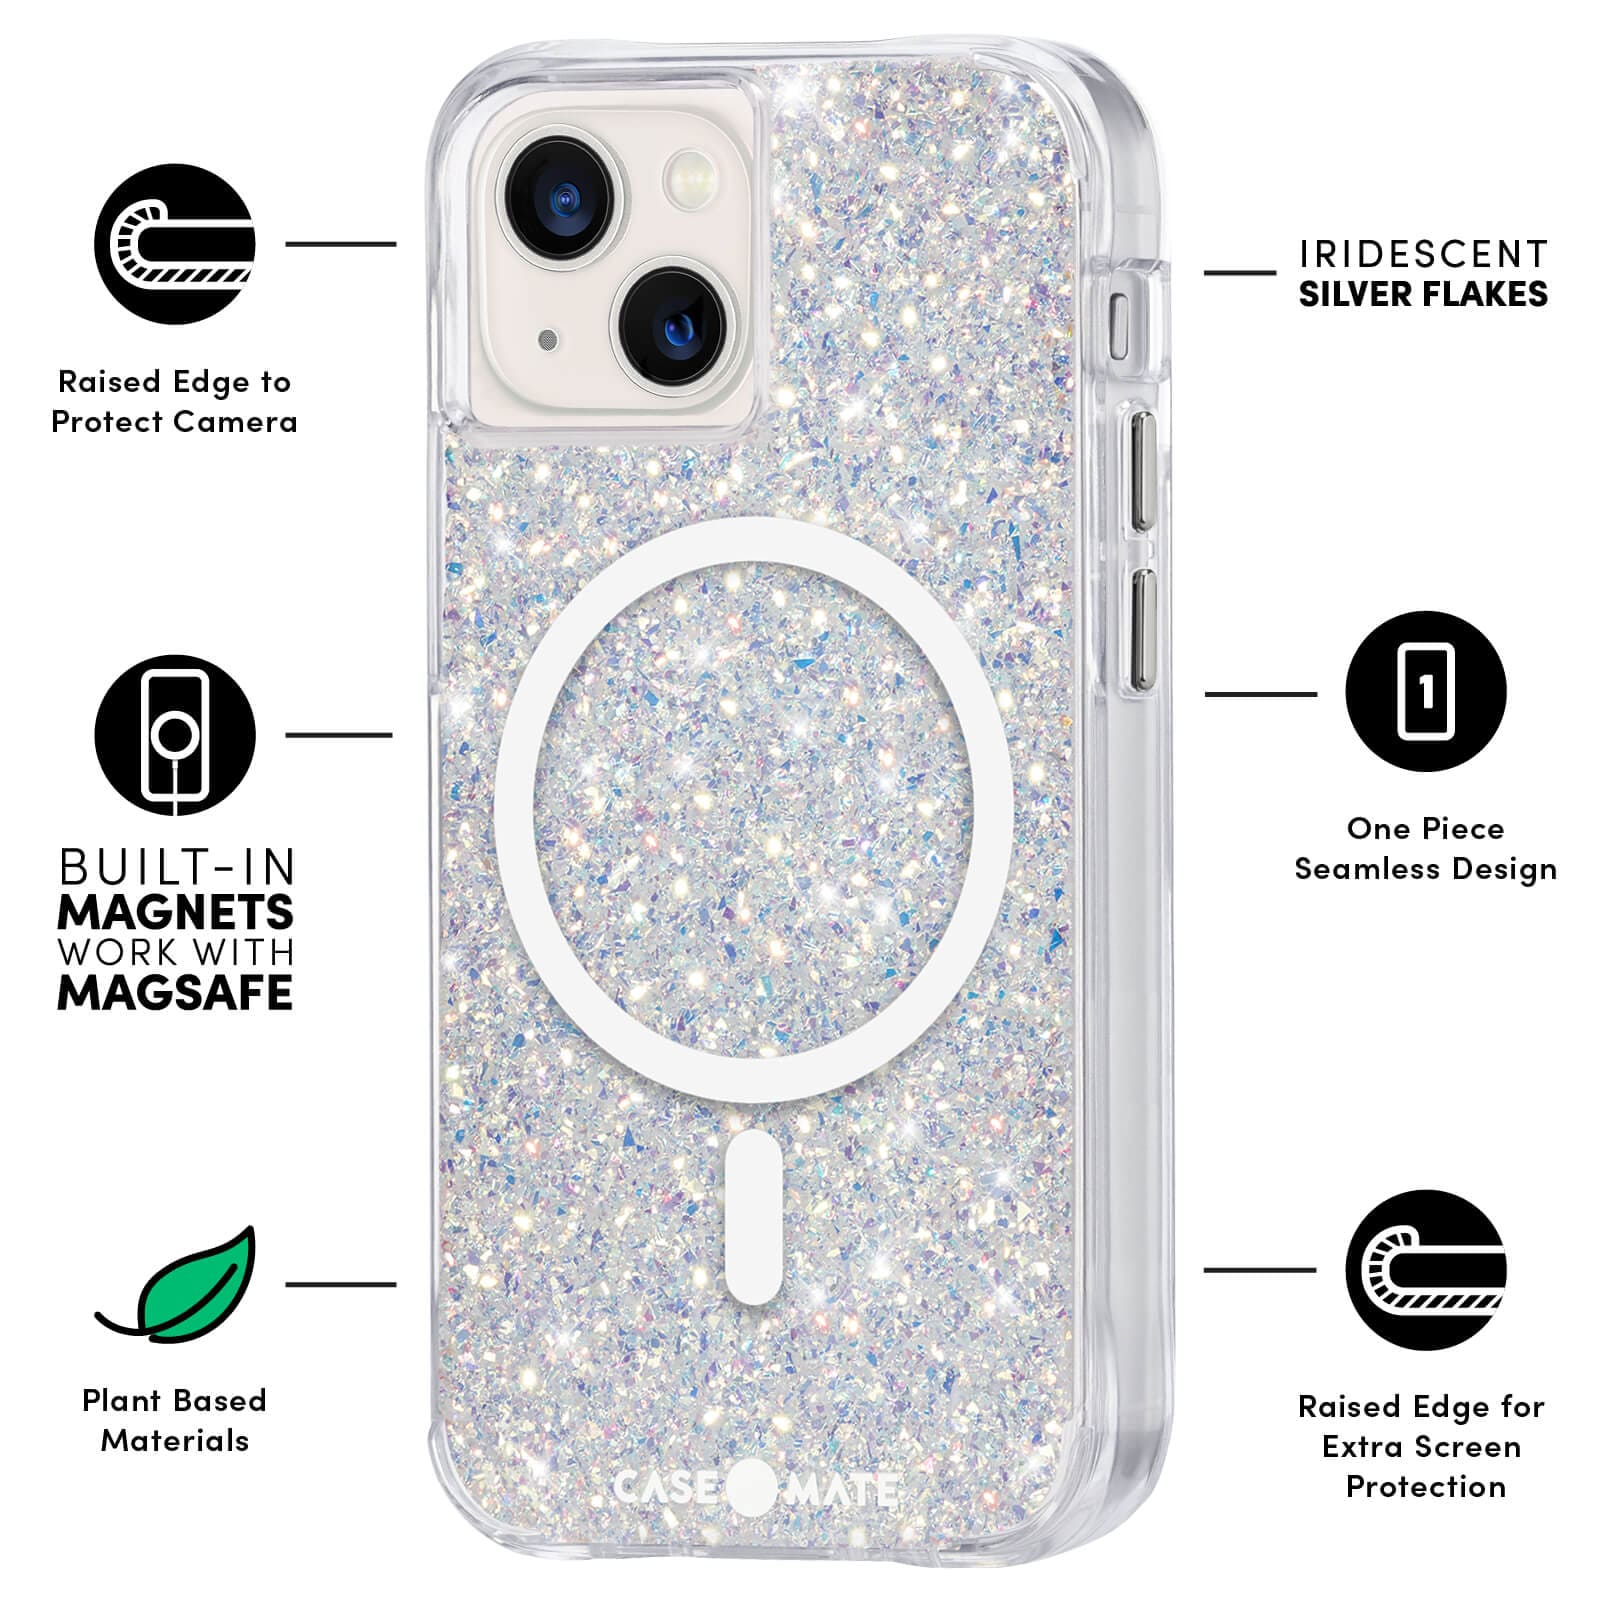 FEATURES: RAISED EDGE TO PROTECT CAMERA, BUILT IN MAGNETS WORK WITH MAGSAFE, PLANT BASED MATERIALS, IRIDESCENT SILVER FLAKES, ONE PIECE SEAMLESS DESIGN, RAISED EDGE FOR EXTRA SCREEN PROTECTION. COLOR::TWINKLE STARDUST